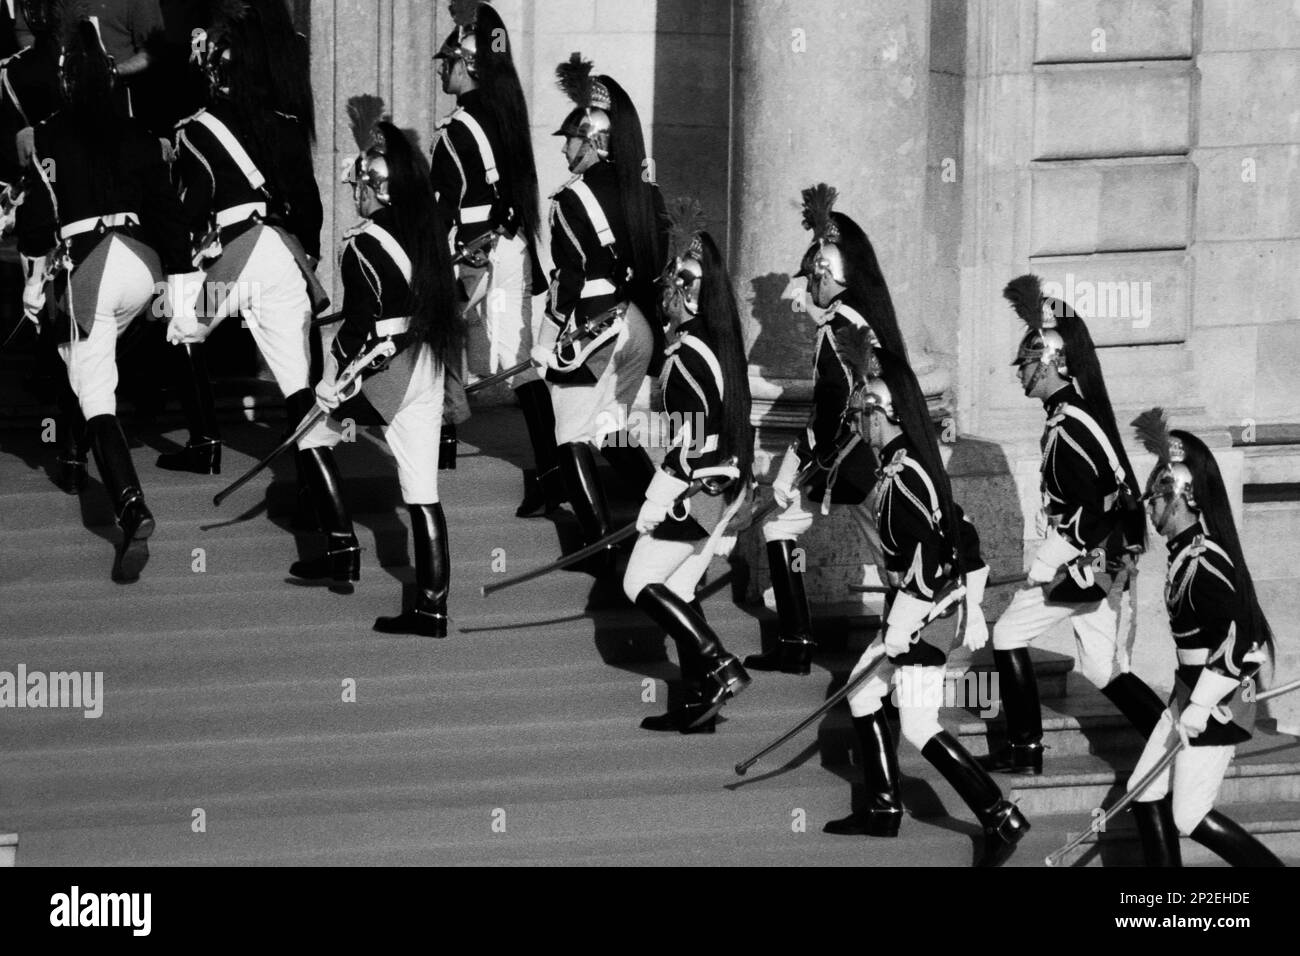 Archives 90ies: G7 summit, Preparing the arrival of the Heads of States, French Republican guard, Lyon, France, 1996 Stock Photo